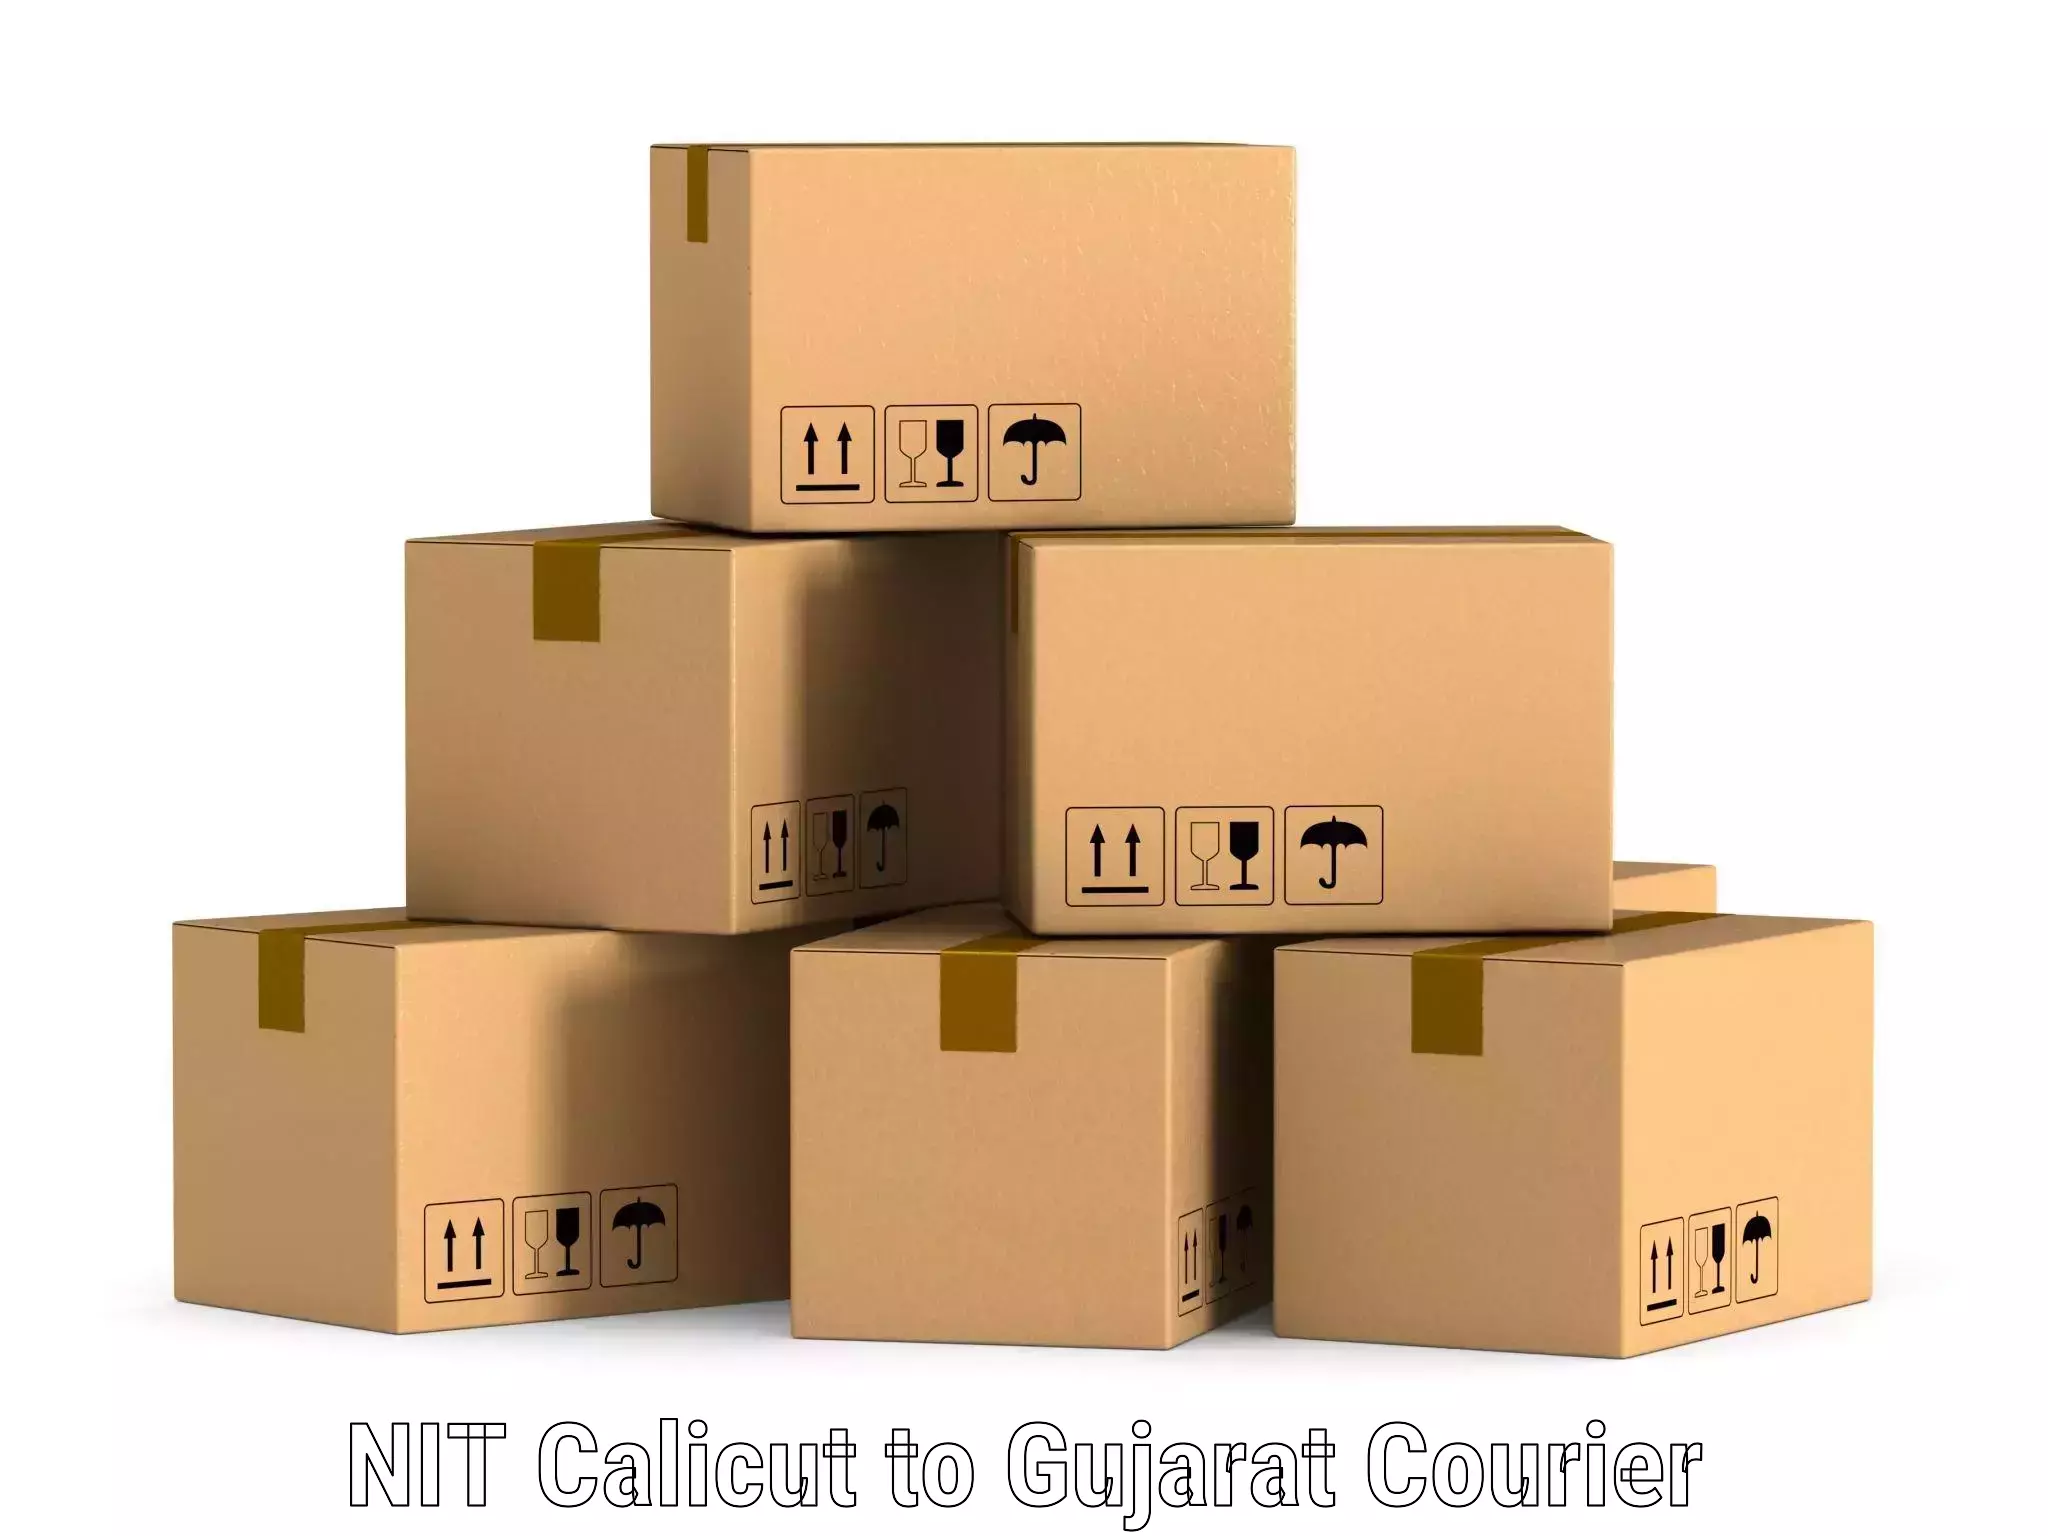 Comprehensive parcel tracking in NIT Calicut to Gujarat